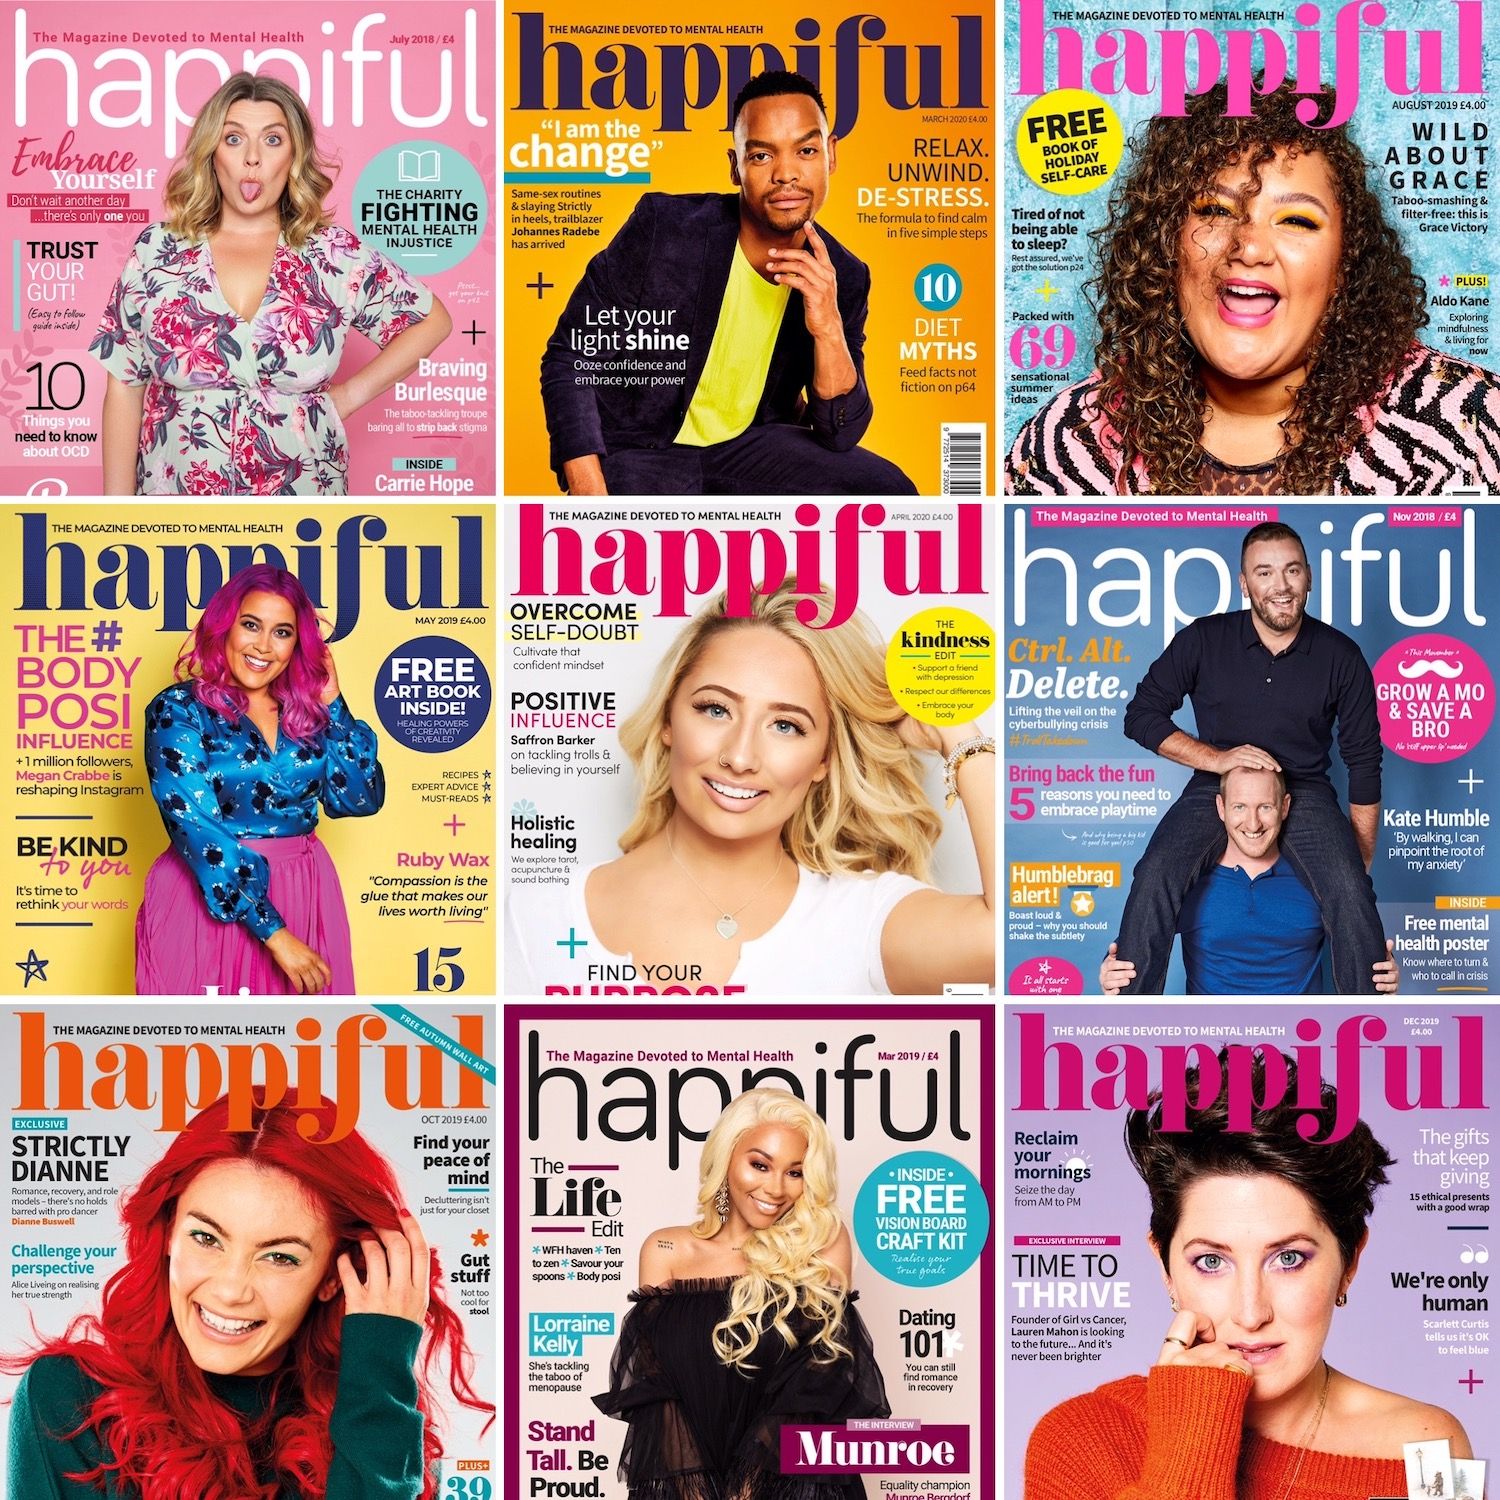 Happiful Magazine:
Supportive and Kind Media Is More Important Now Than Ever